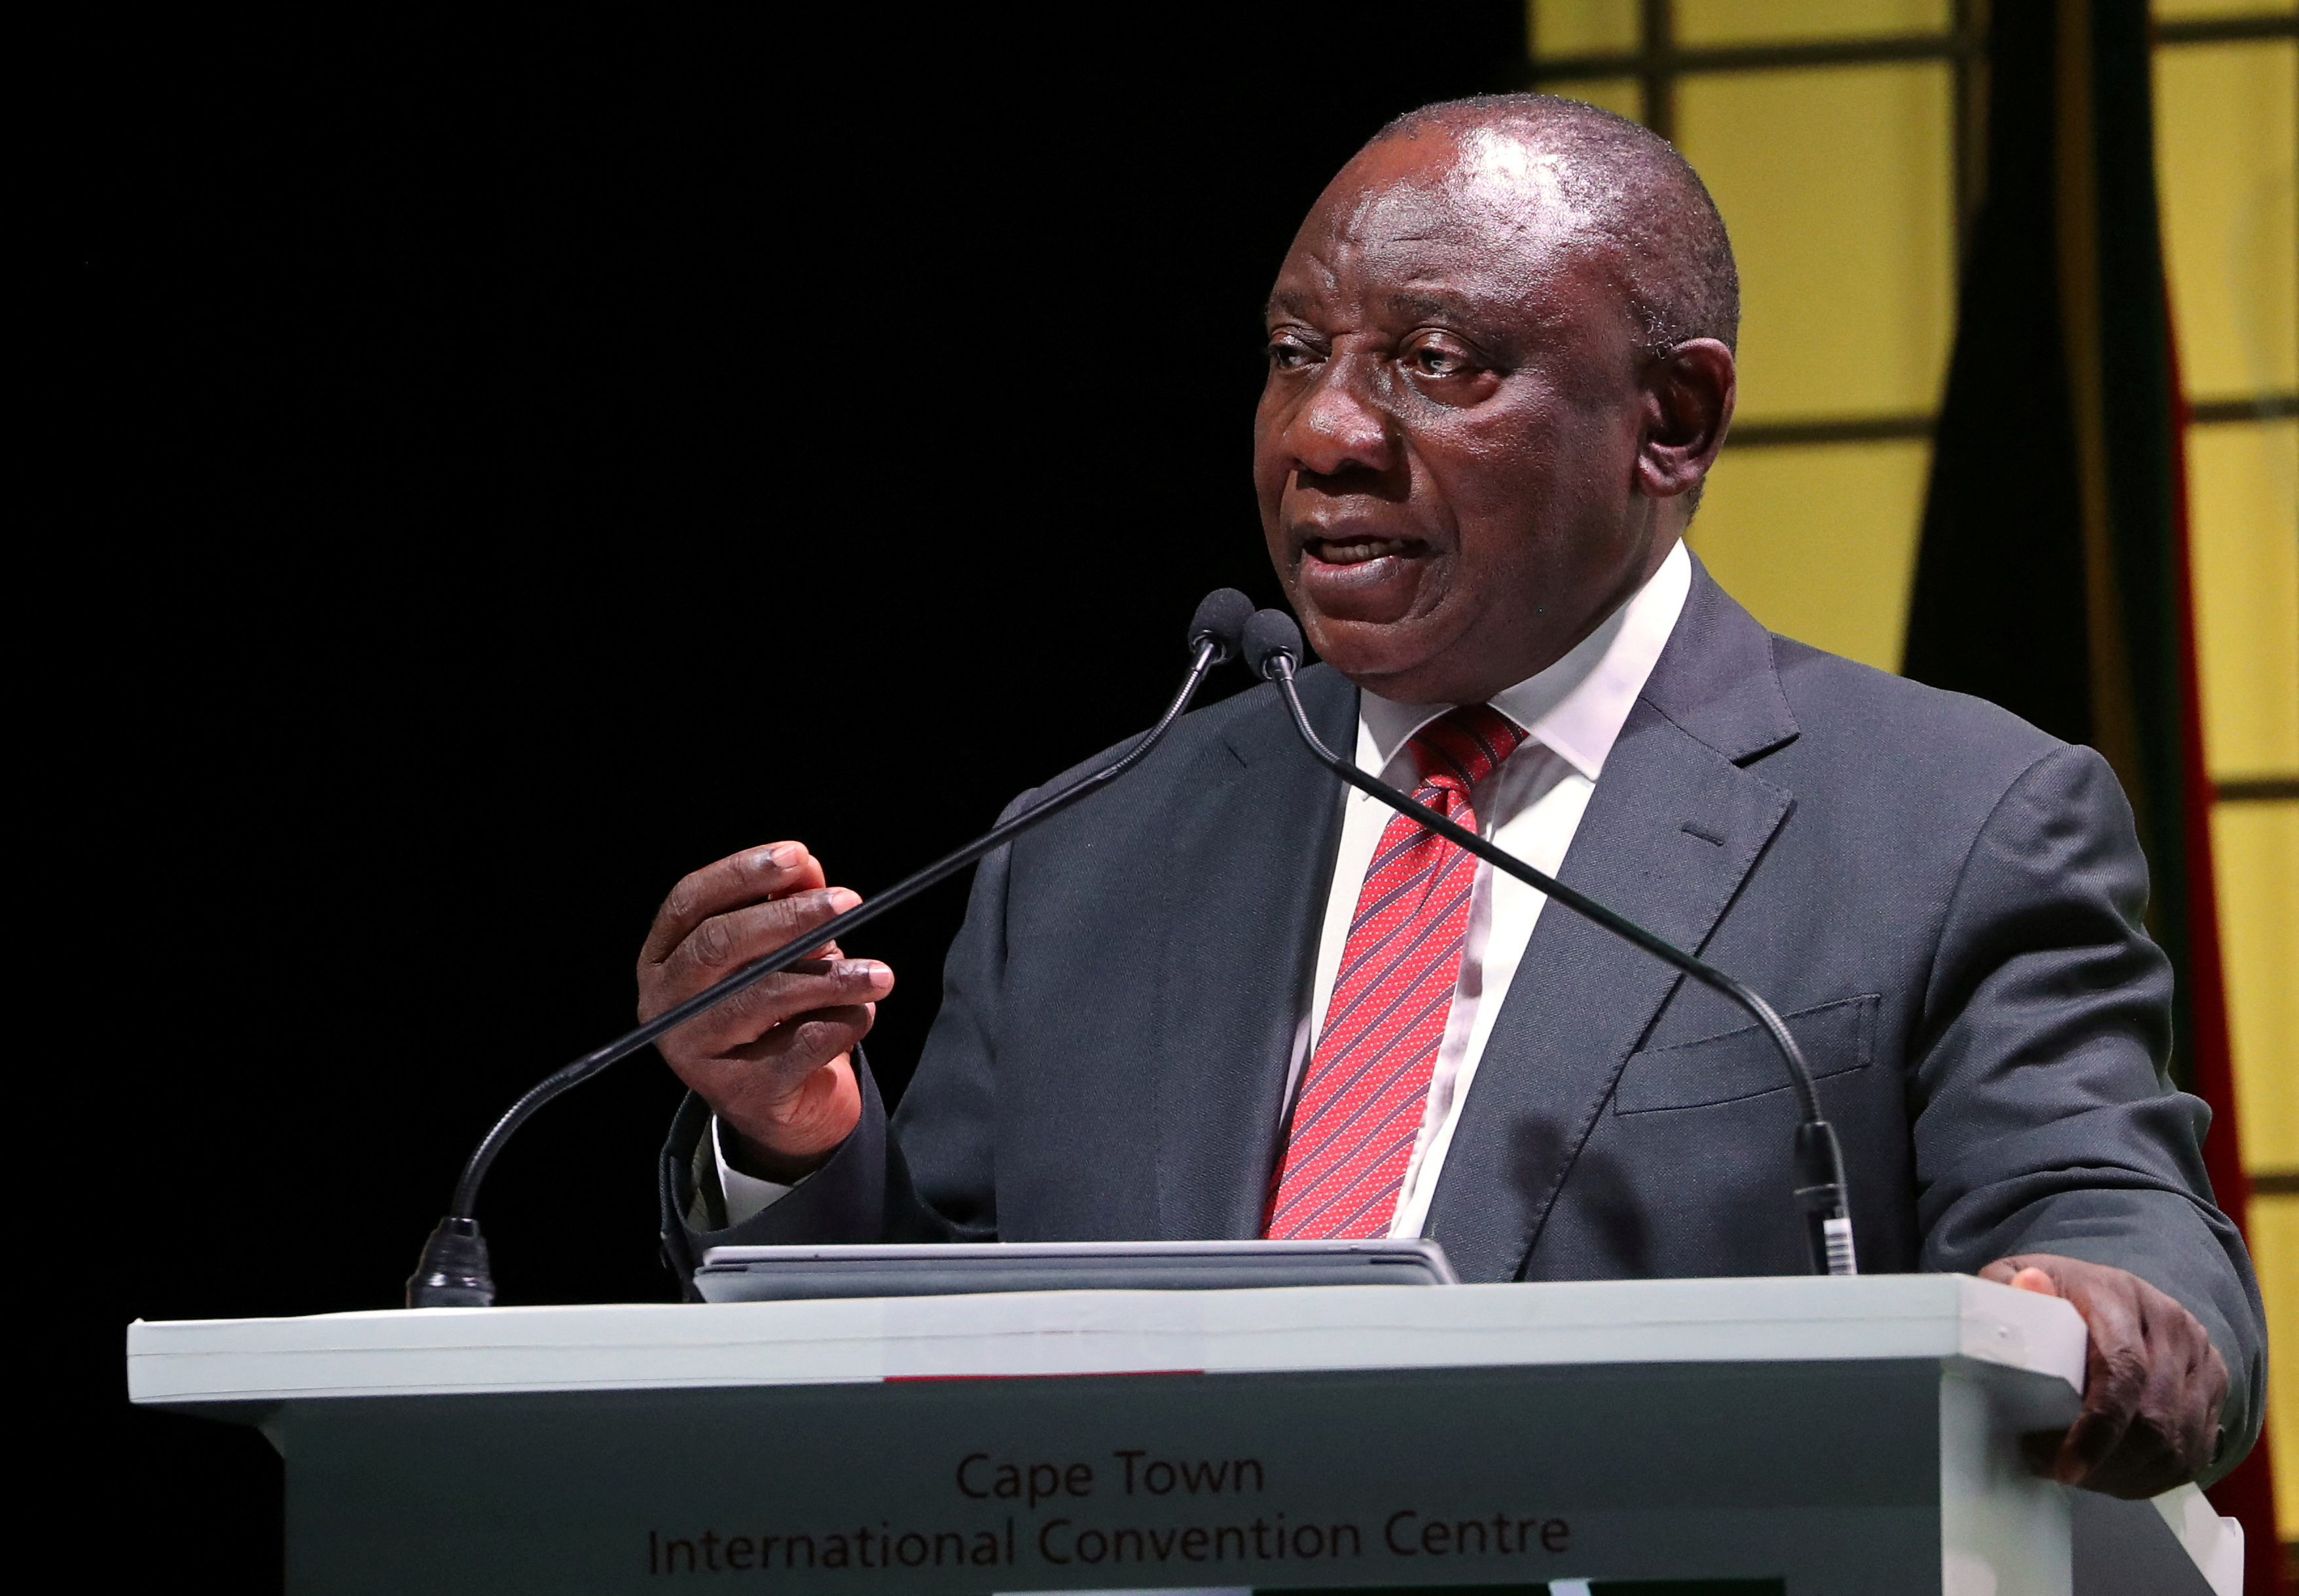 South African President Cyril Ramaphosa in Cape Town